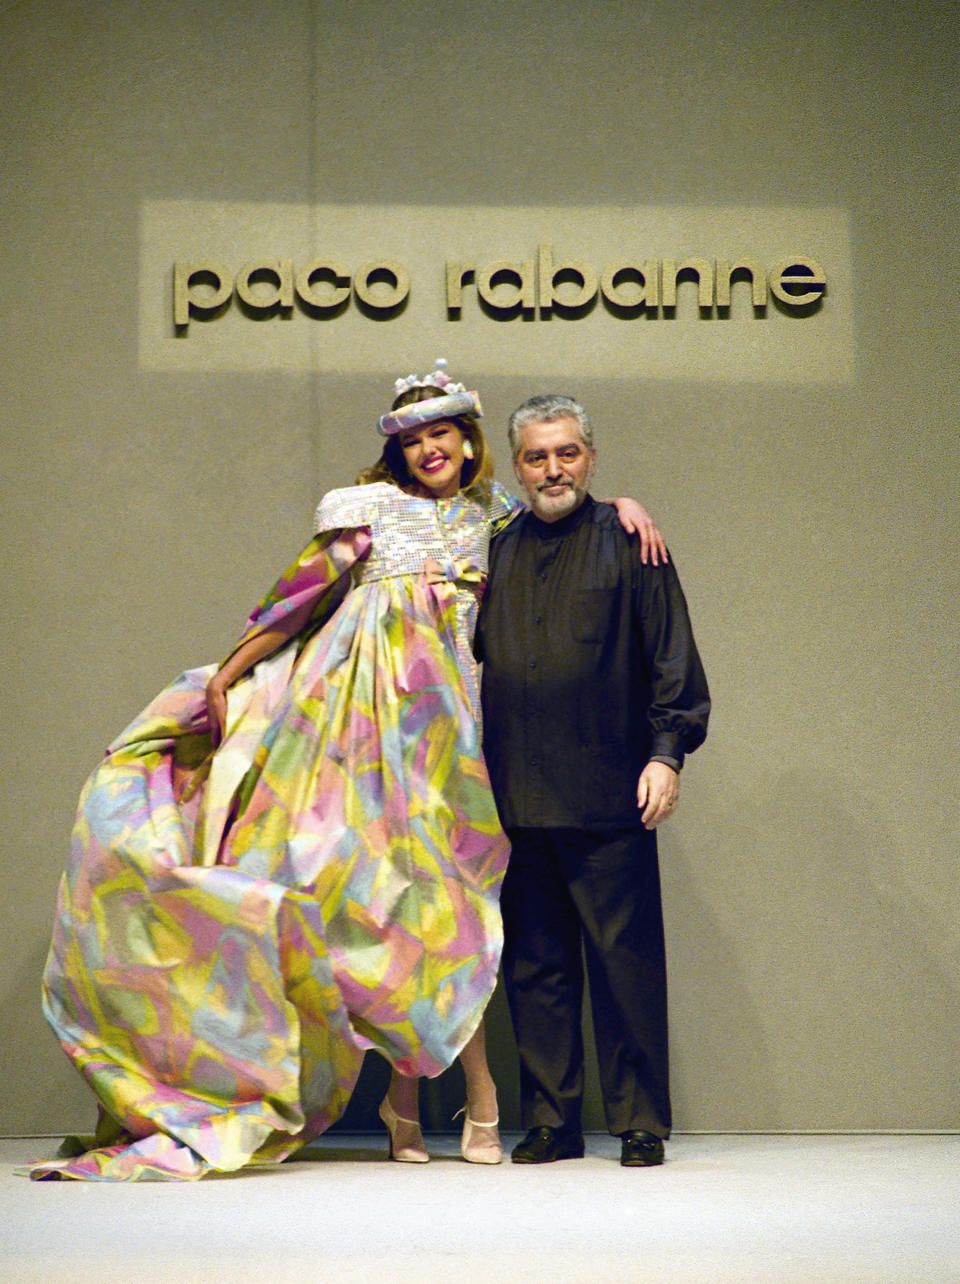 FILE - Franco-Spanish fashion designer Paco Rabanne poses with a model on January 30, 1991 in Paris, France. The Spanish-born pace-setting designer known for perfumes sold worldwide and his metallic, space-age fashions, has died, the group that owns his fashion house announced on its website Friday Feb.3, 2023. He was 88. (AP Photo/Pierre Gleizes, File)